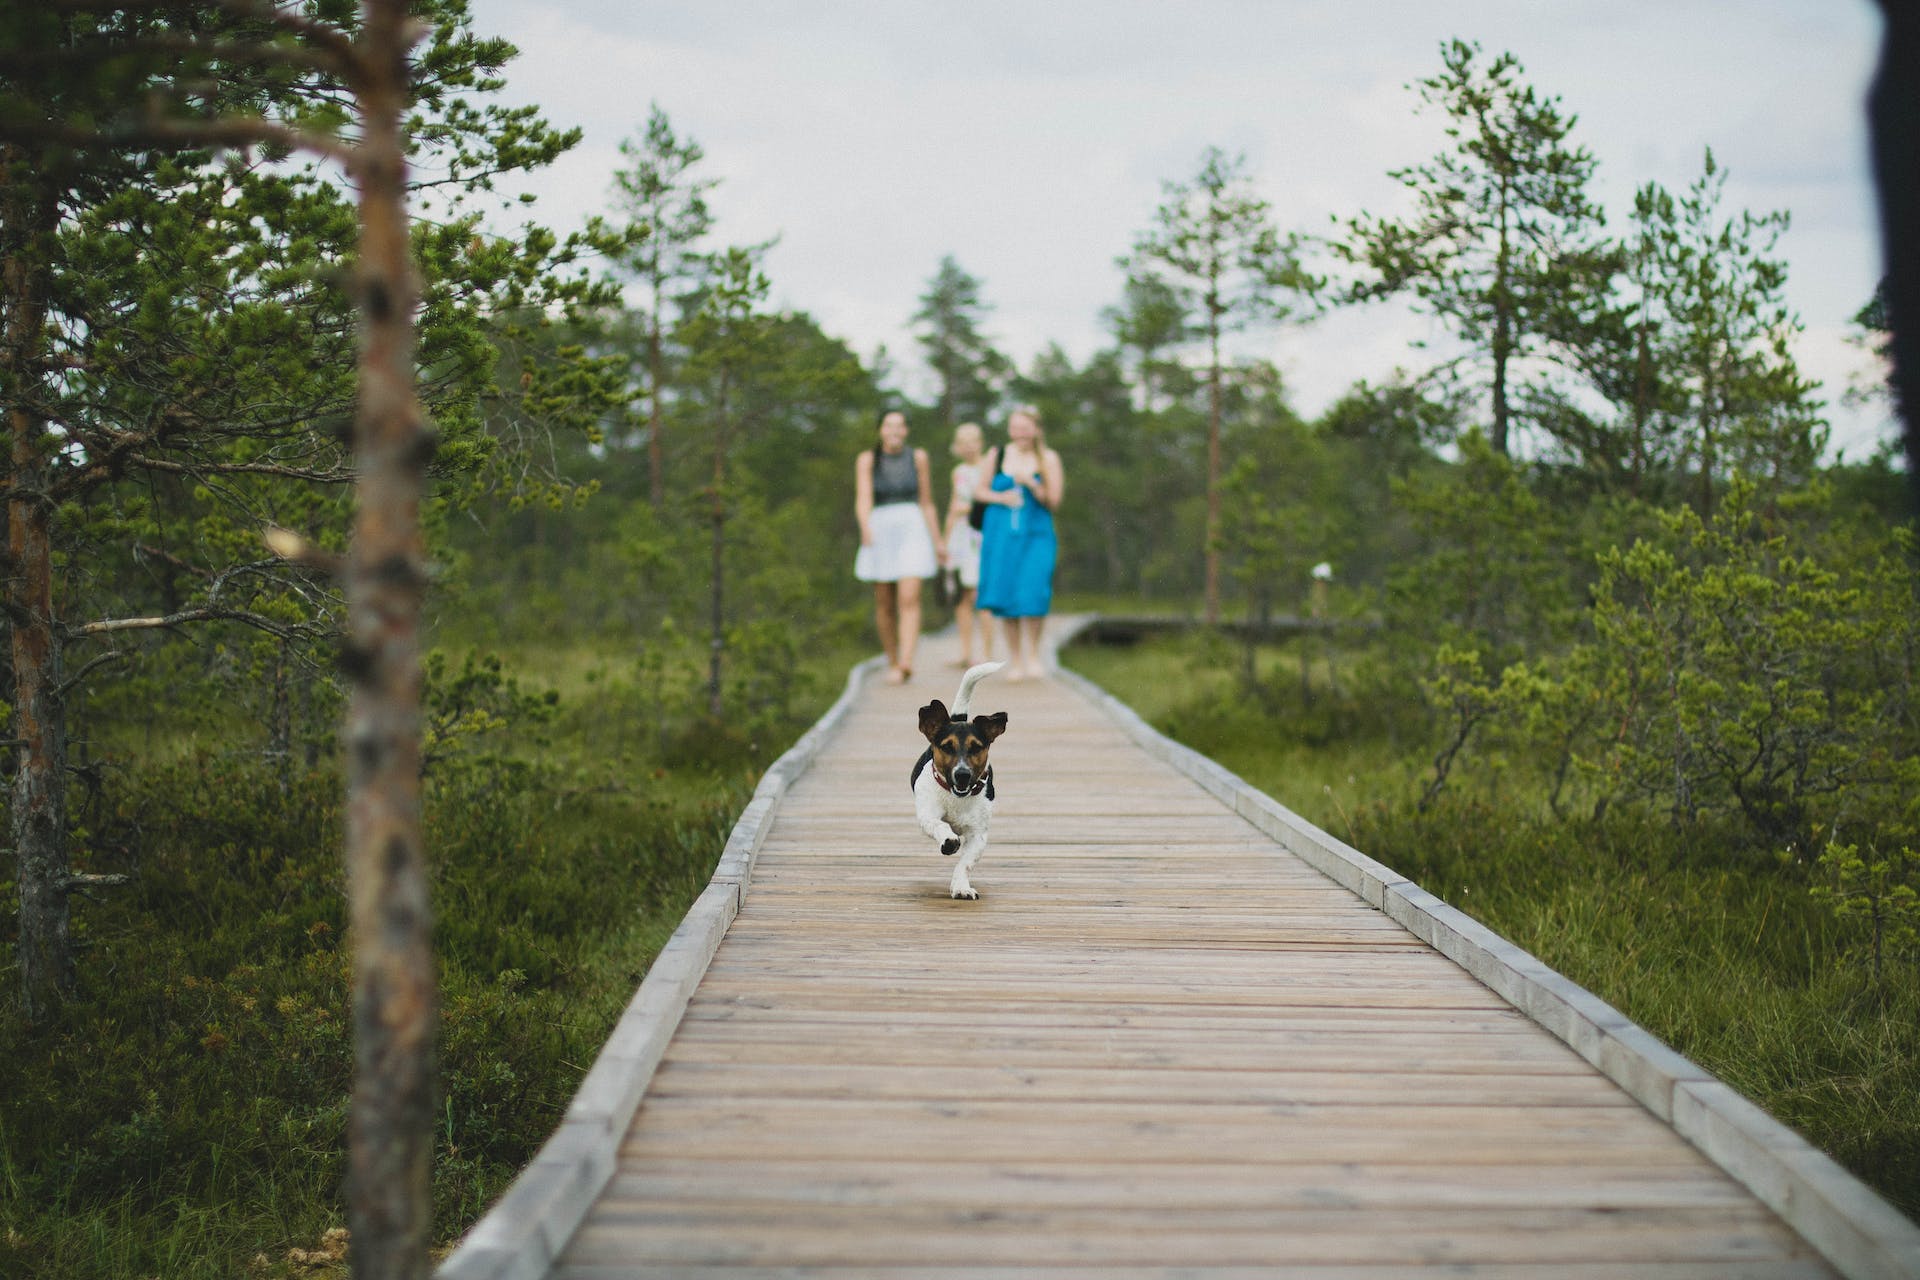 A dog running away from a group of women into the forest